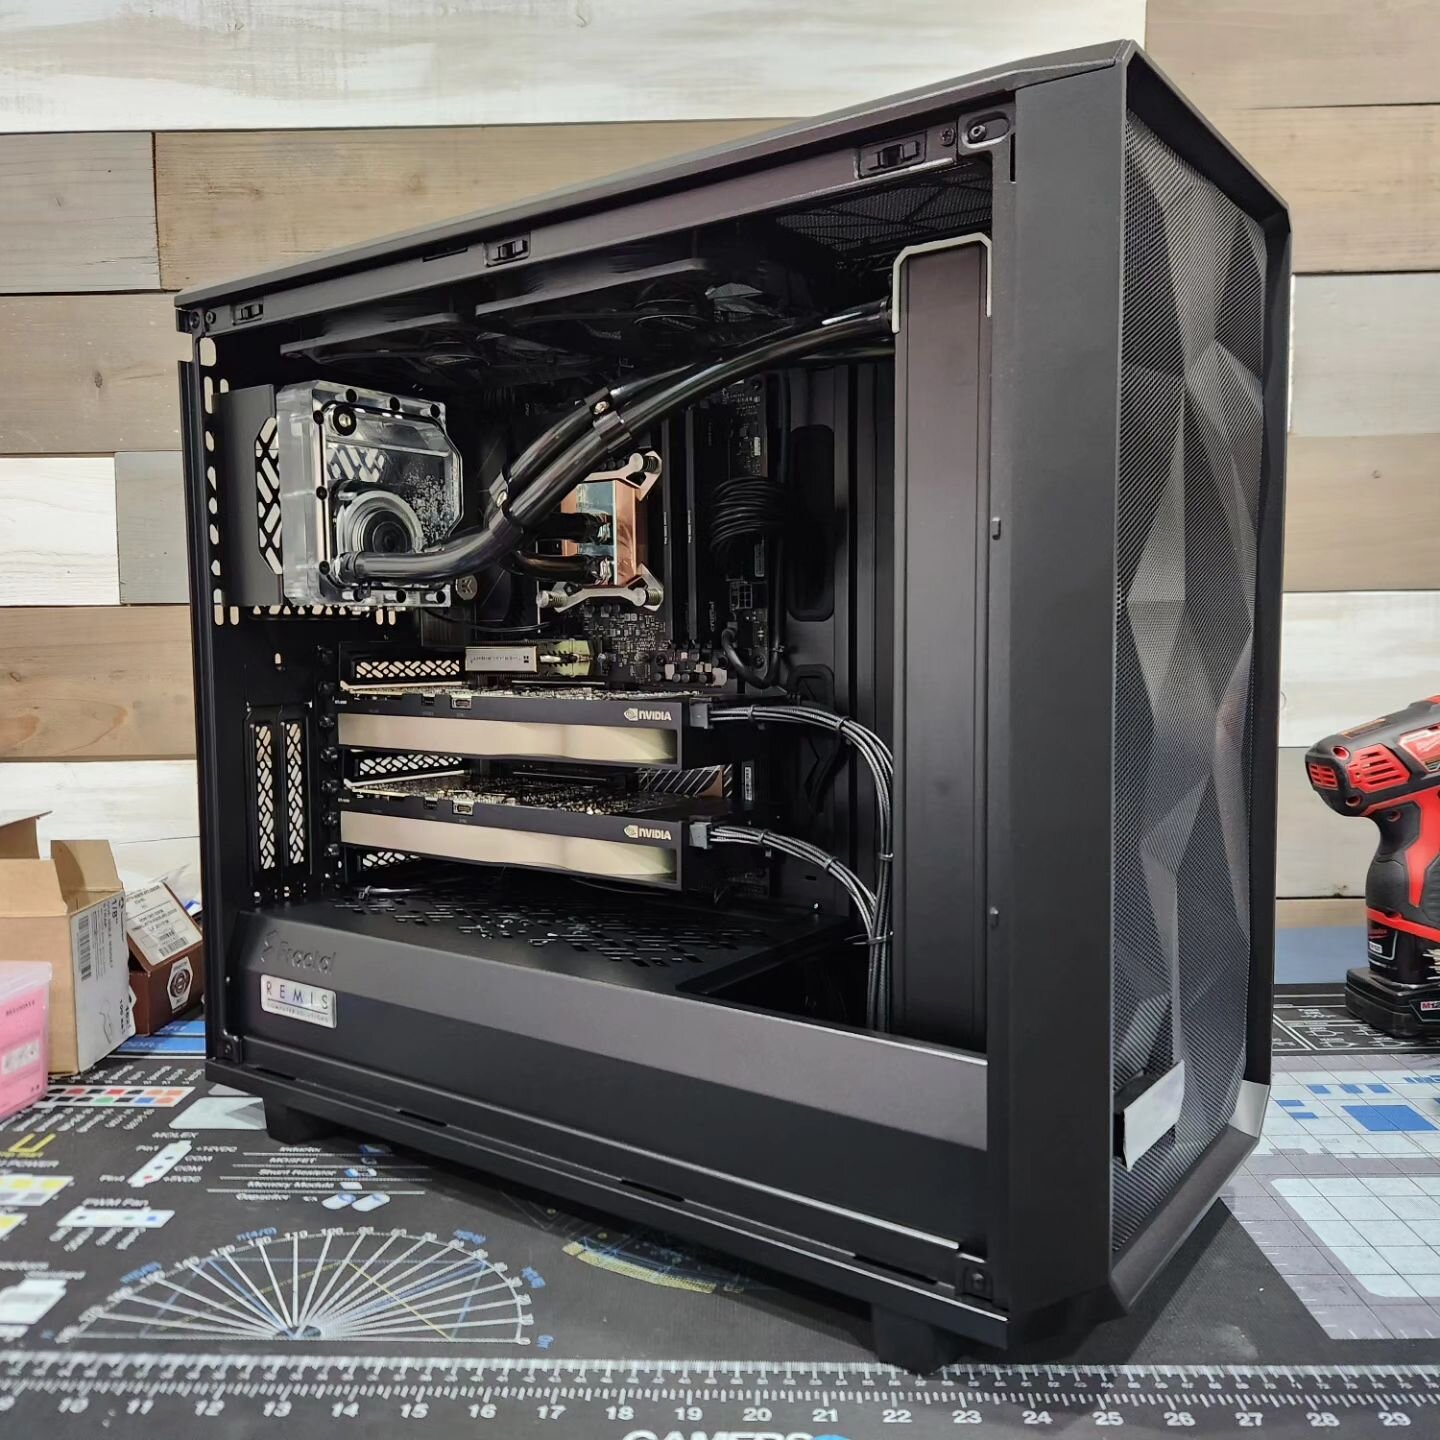 Haven't been posting a lot but still busy! Typically I'm on Twitter/X and LinkedIn more often these days.

This system is now at the client. 14900k, X2 RTX a5000, 96GB RAM, 2TB nvme and custom loop with EK pump/rad and Heatkiller IV block. 

#customp